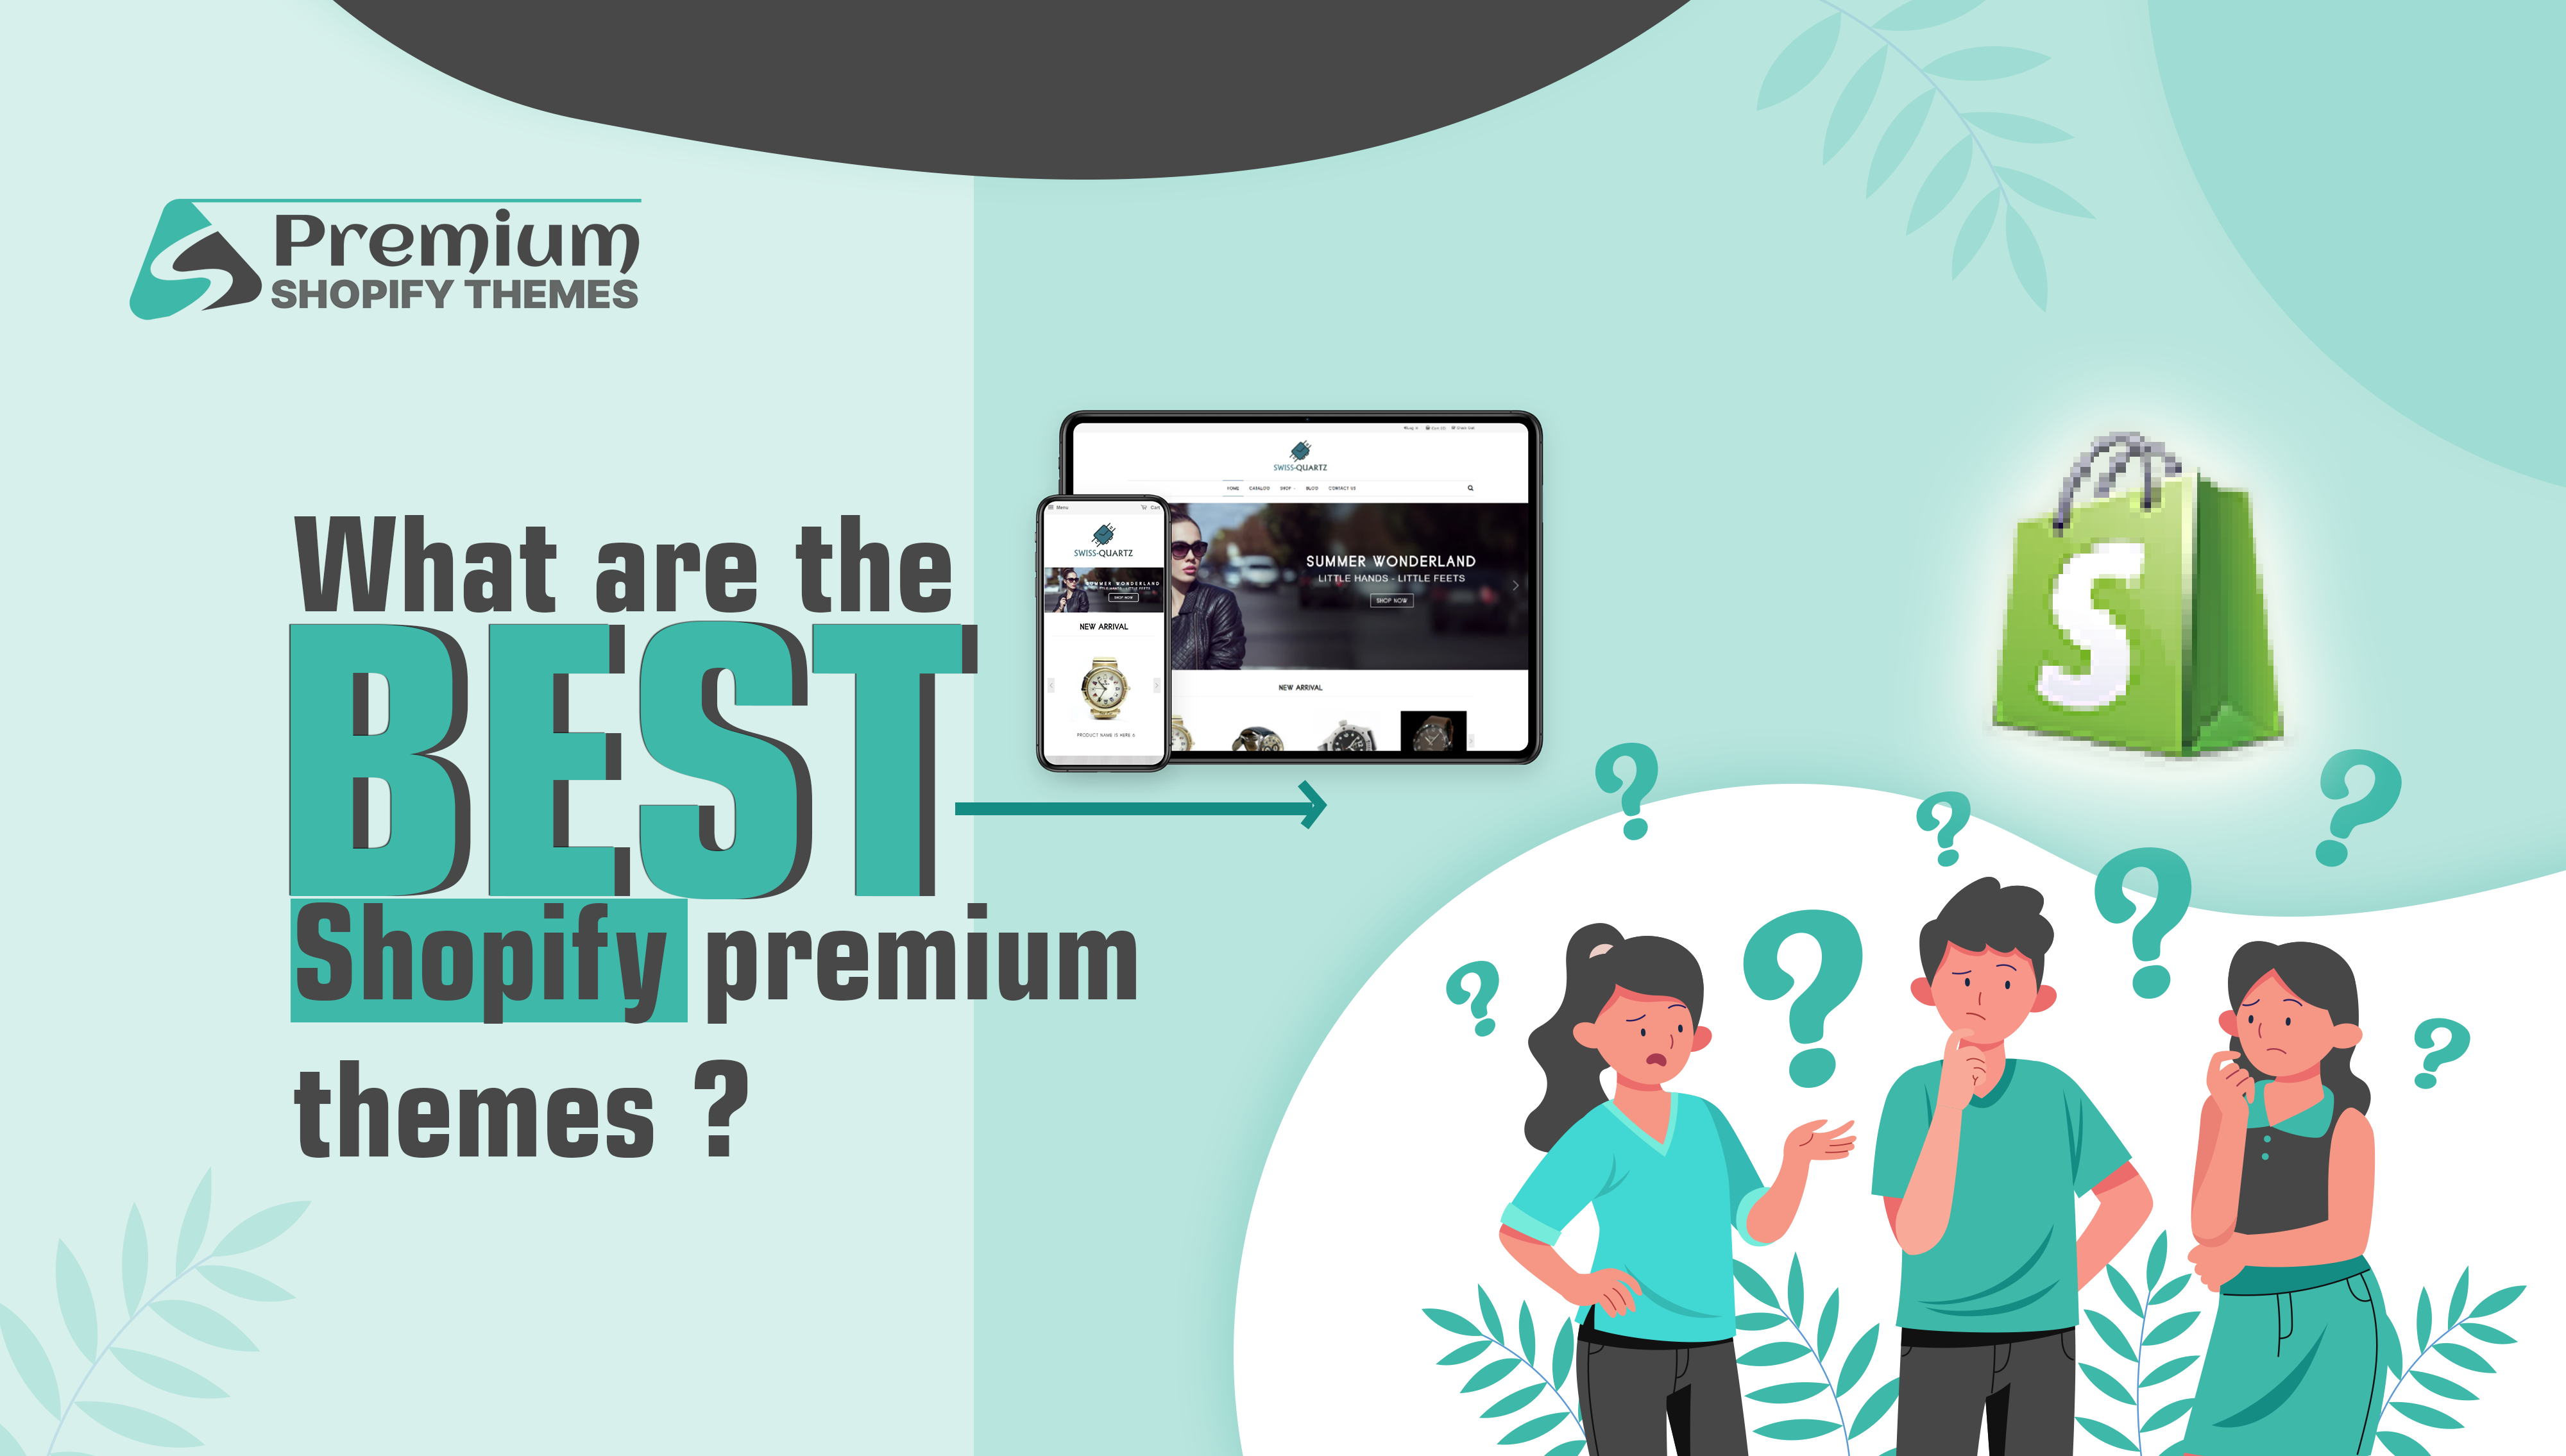 What are the best Shopify premium themes?